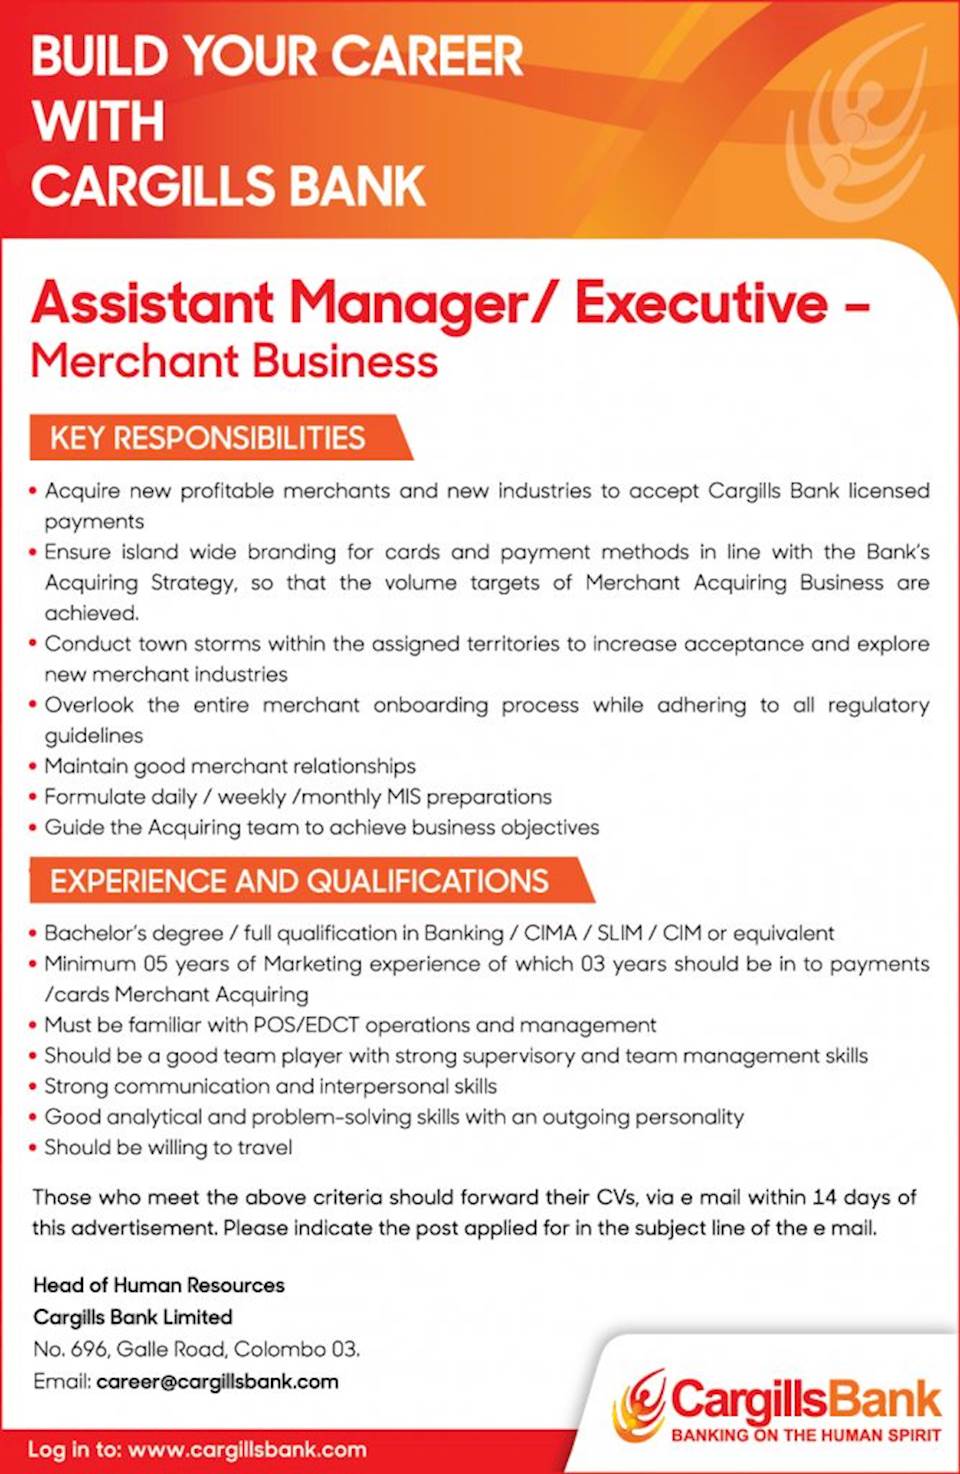 Assistant Manager / Executive - Merchant Business 